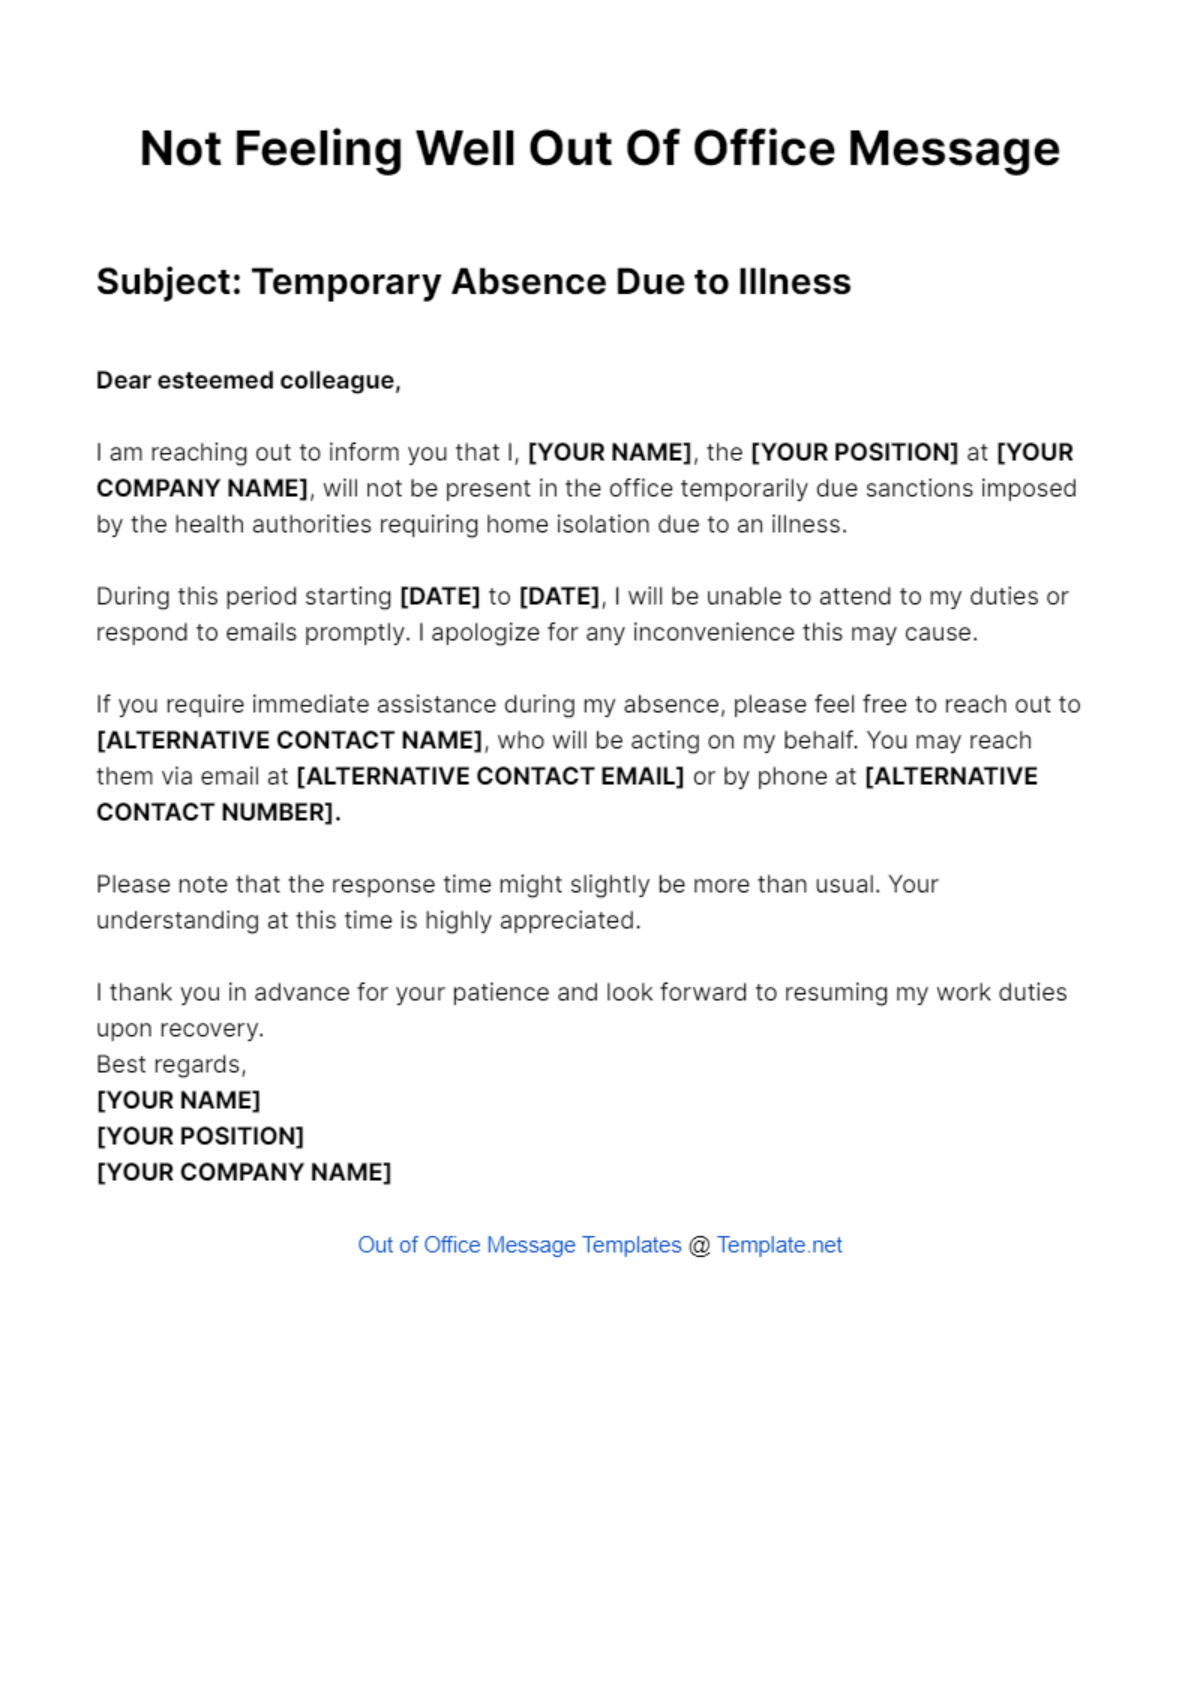 Not Feeling Well Out Of Office Message Template